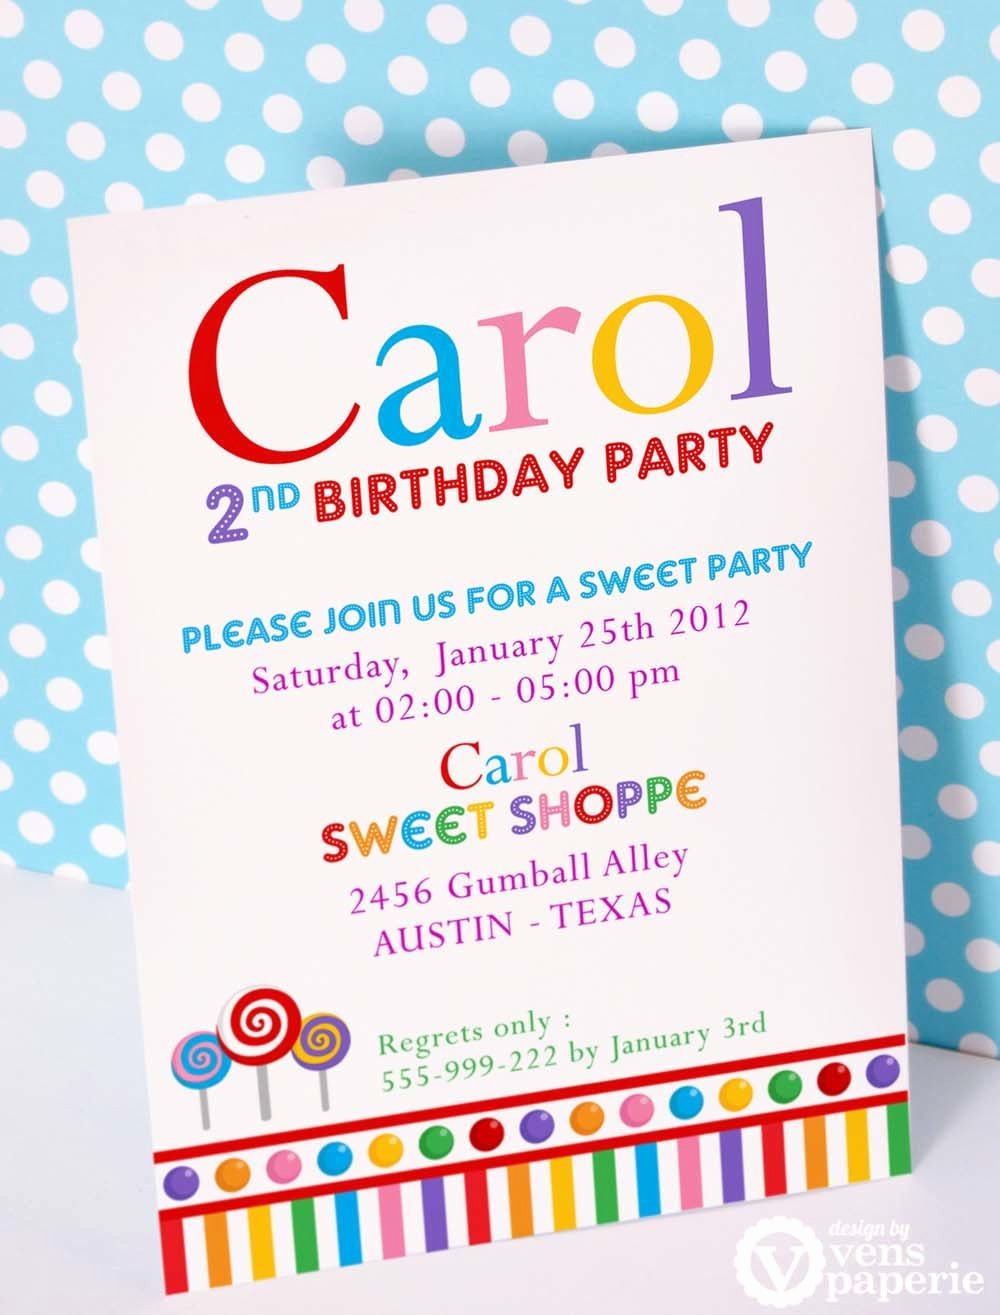 Candyland Birthday Party Invitations Beautiful Diy Printable Invitation Card Candyland Sweet Shoppe